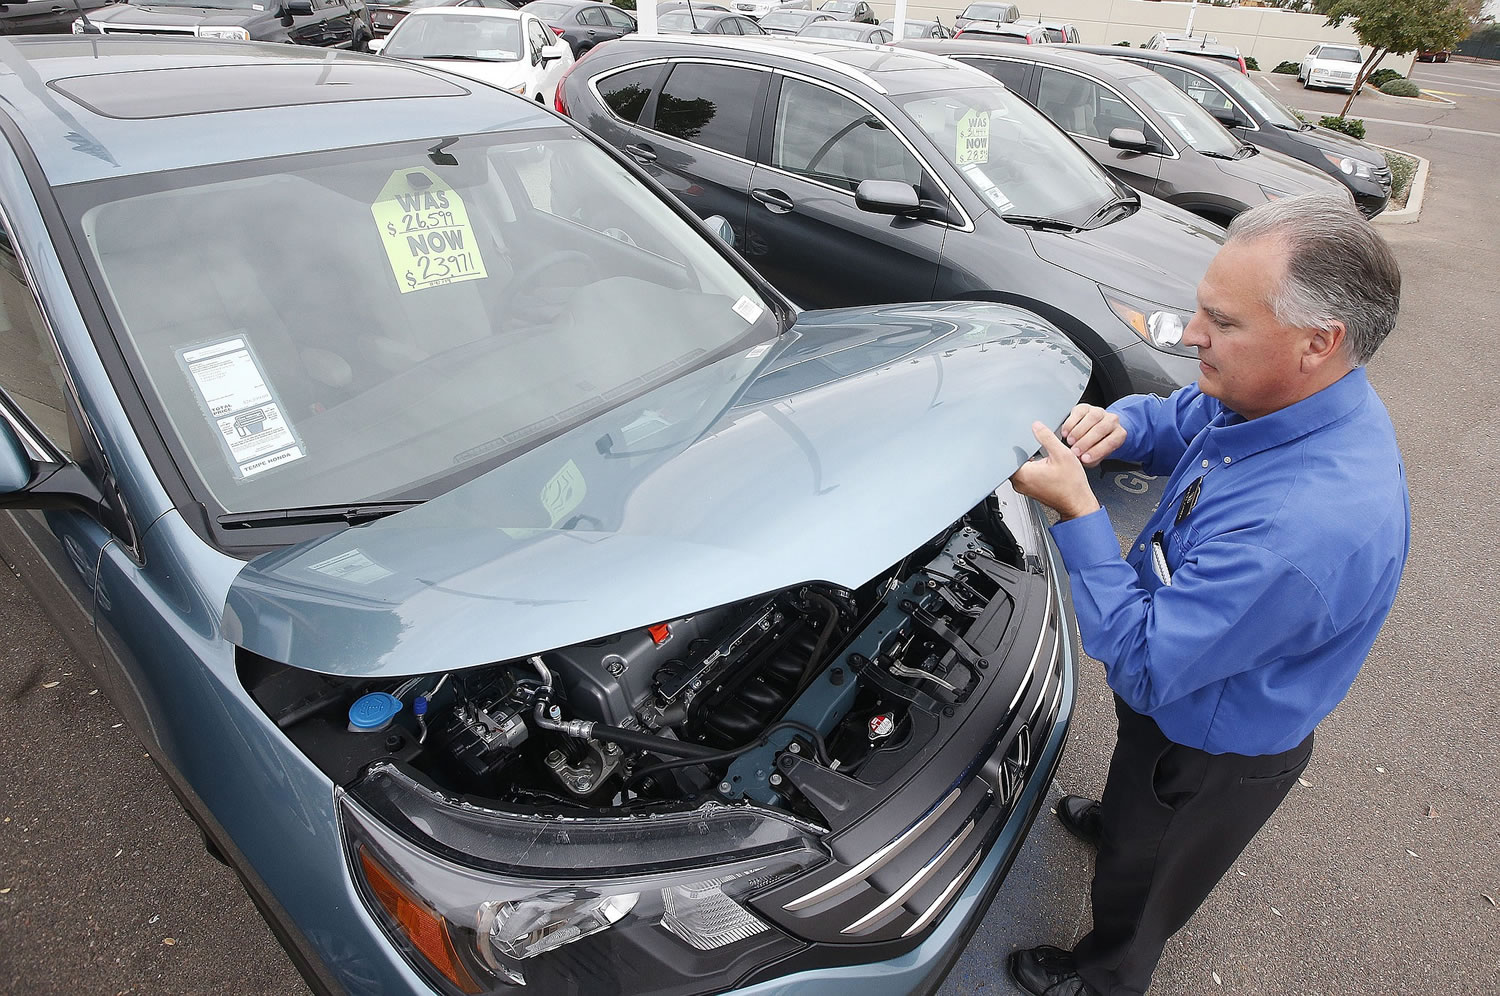 Associated Press files
Mike Johnson, a sales manager at a Honda car dealership, opens the hood of a Honda CRV in Tempe, Ariz.